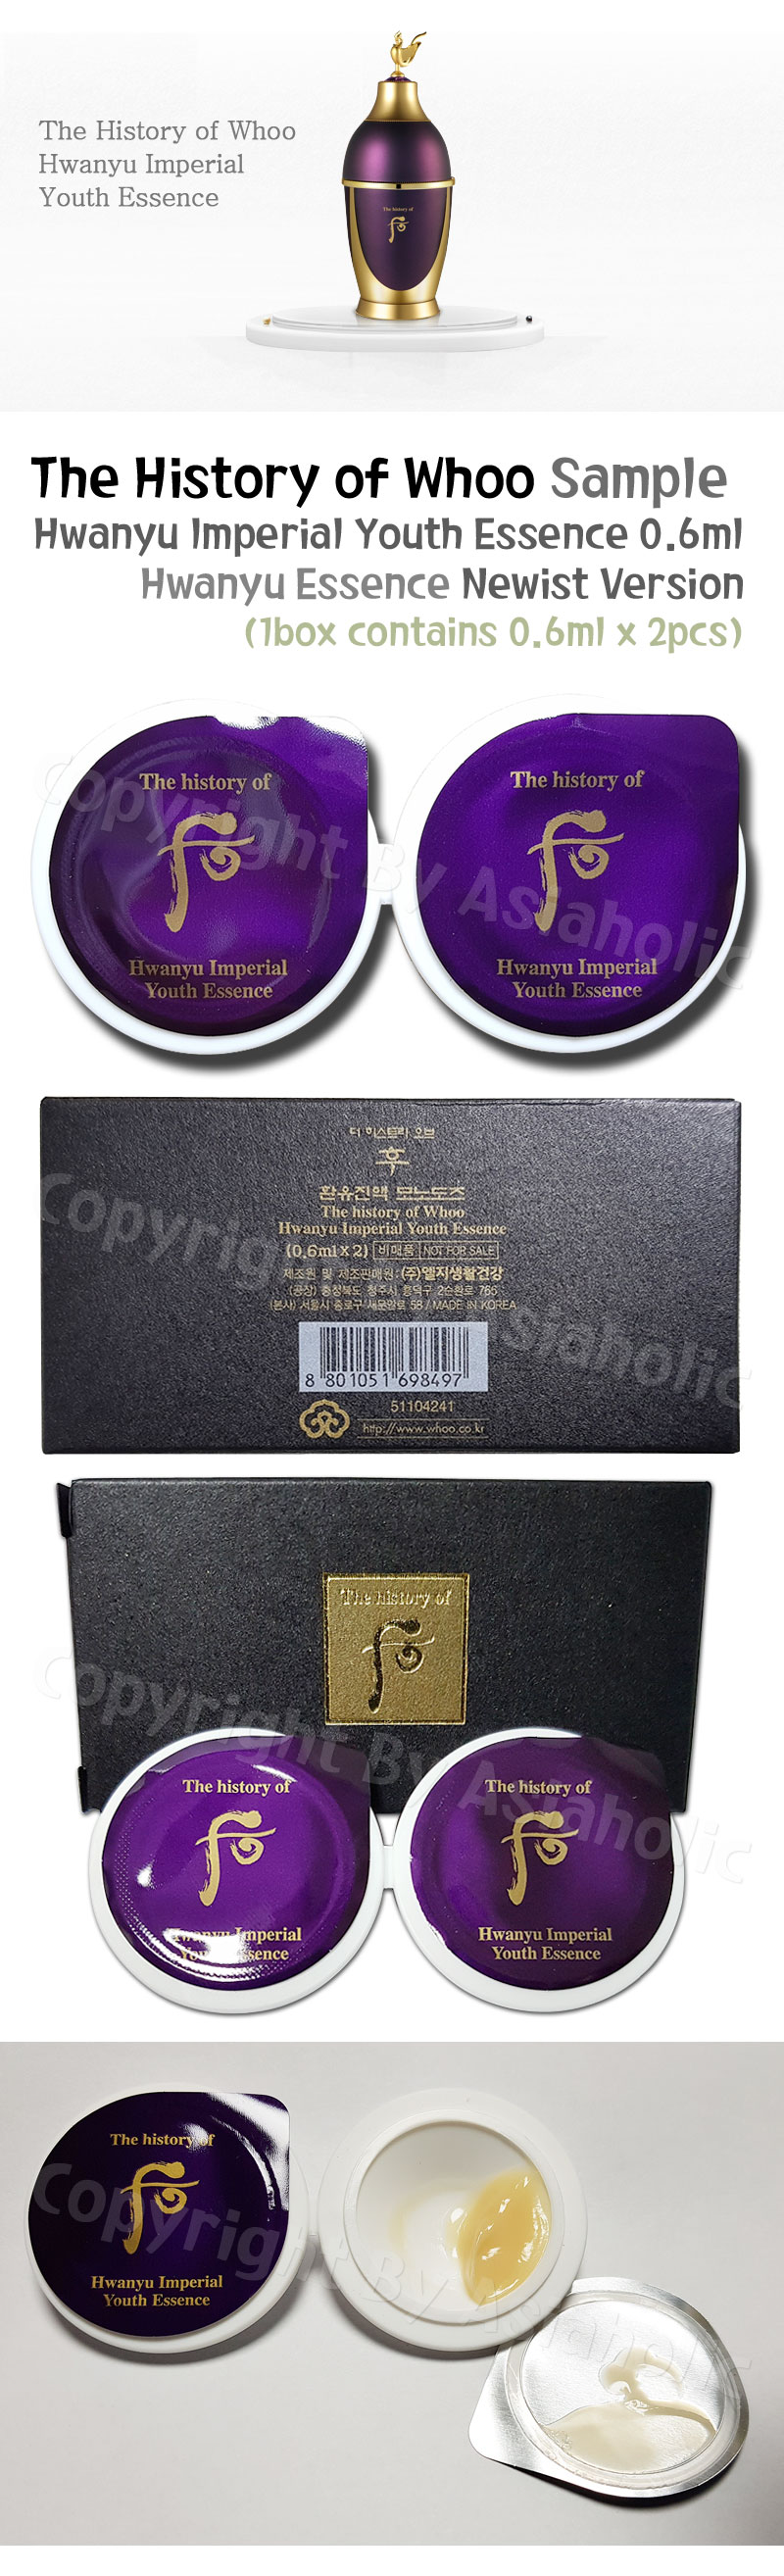 The history of Whoo Hwanyu Imperial Youth Essence 0.6ml x 16pcs (8Box) Newist Version